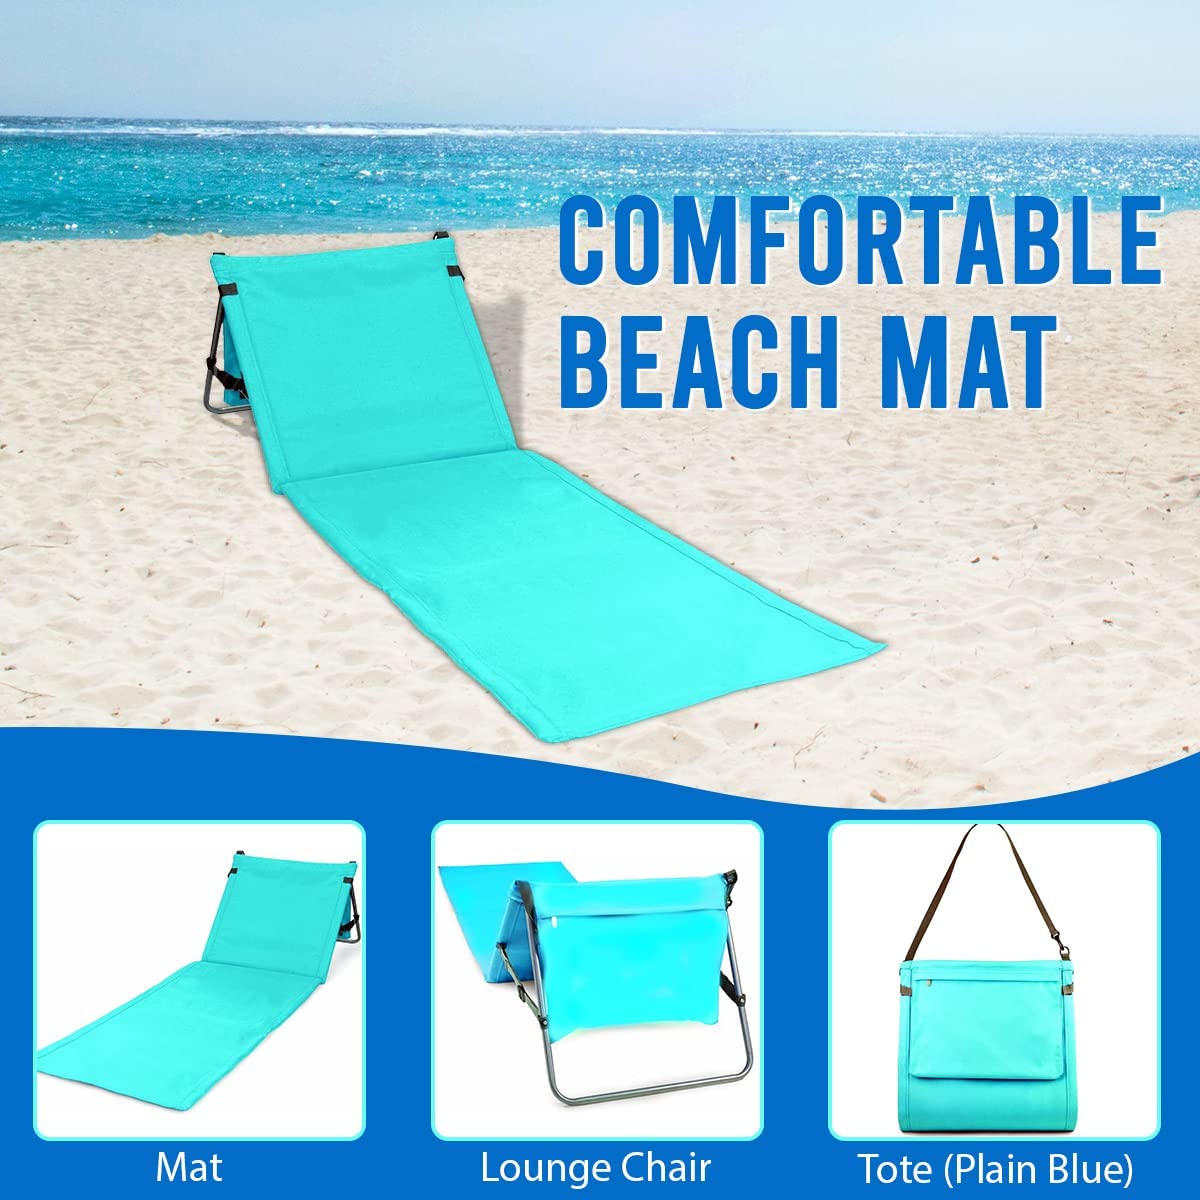 Bo-Toys Portable Beach Mat Padded Lounge Chair and Tote (Plain Blue) - image 5 of 10